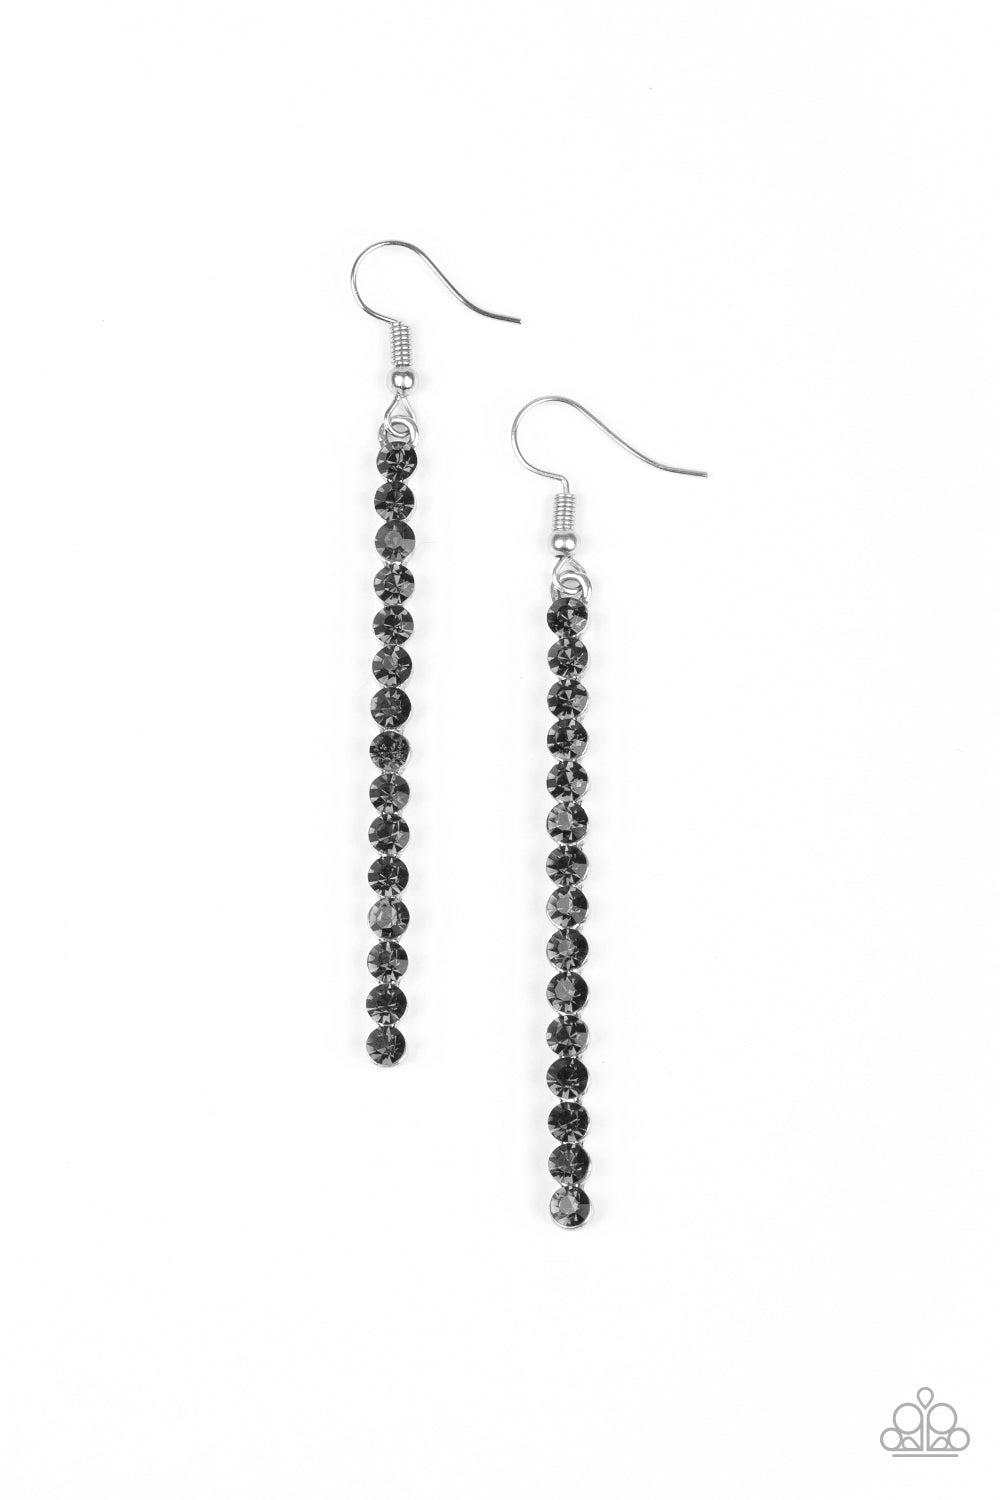 Grunge Meets Glamour - Silver Earrings